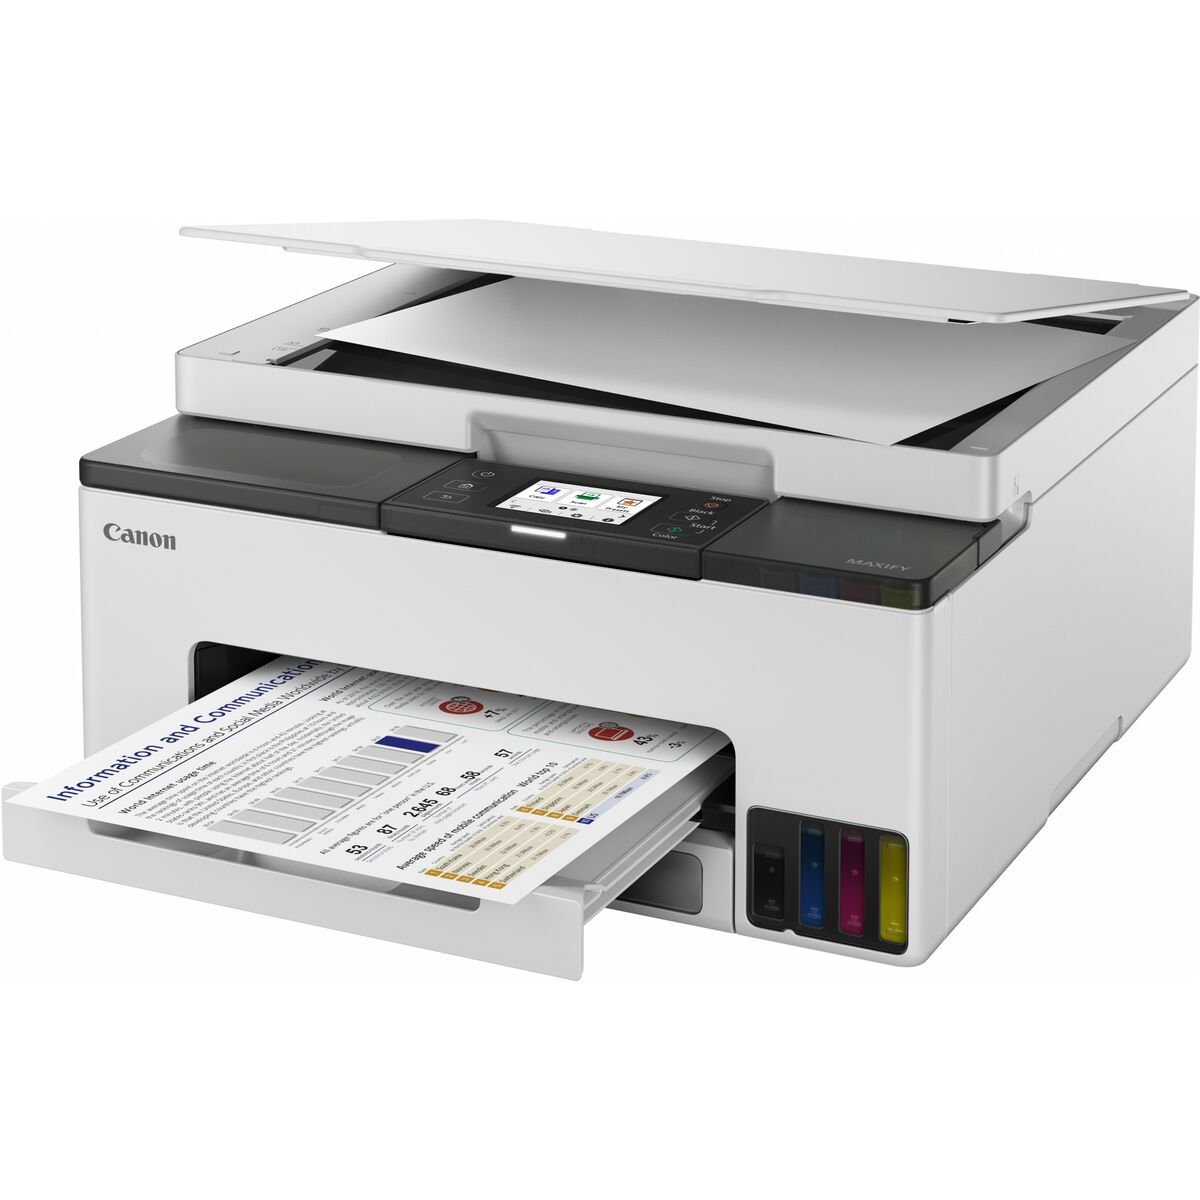 Multifunction Printer Canon MAXIFY GX1050, Canon, Computing, Printers and accessories, multifunction-printer-canon-maxify-gx1050-1, Brand_Canon, category-reference-2609, category-reference-2642, category-reference-2645, category-reference-t-19685, category-reference-t-19911, category-reference-t-21378, category-reference-t-25692, computers / peripherals, Condition_NEW, office, Price_300 - 400, Teleworking, RiotNook